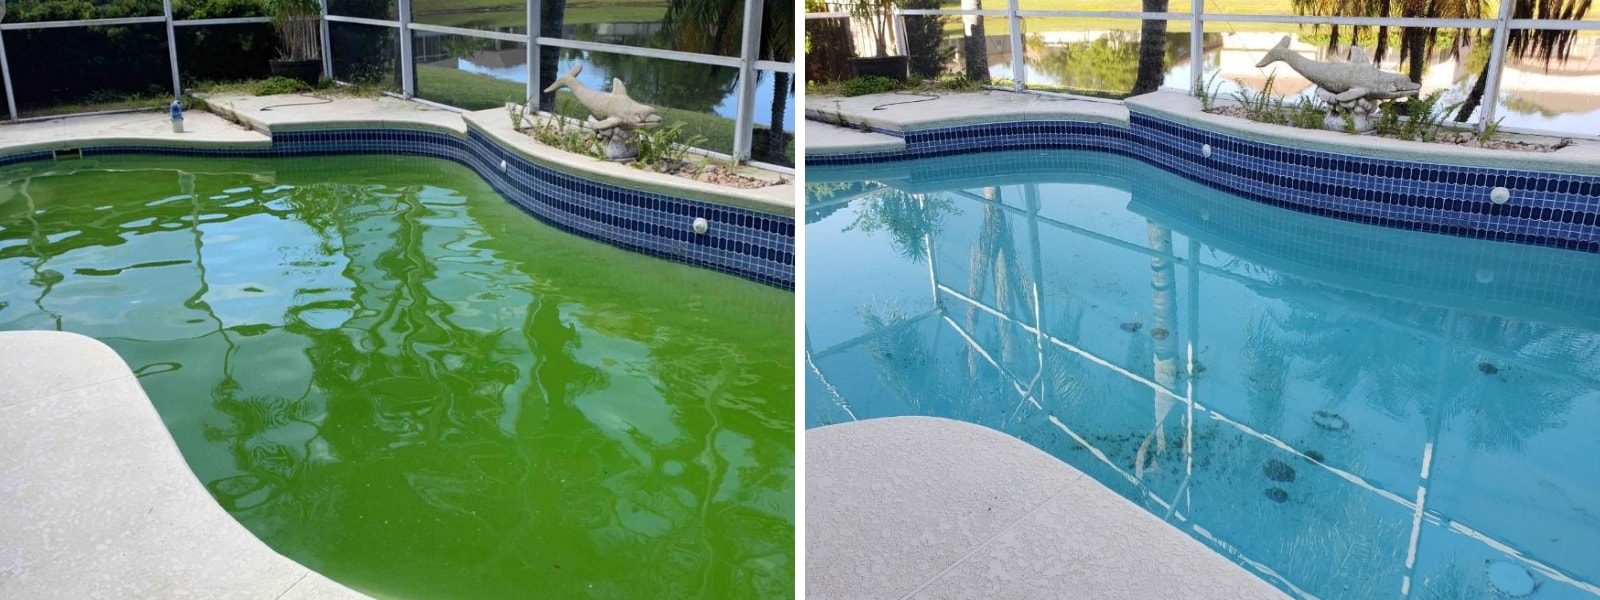 From green to great: How to clean a green swimming pool - Fratelli Pool  Cleaning Service